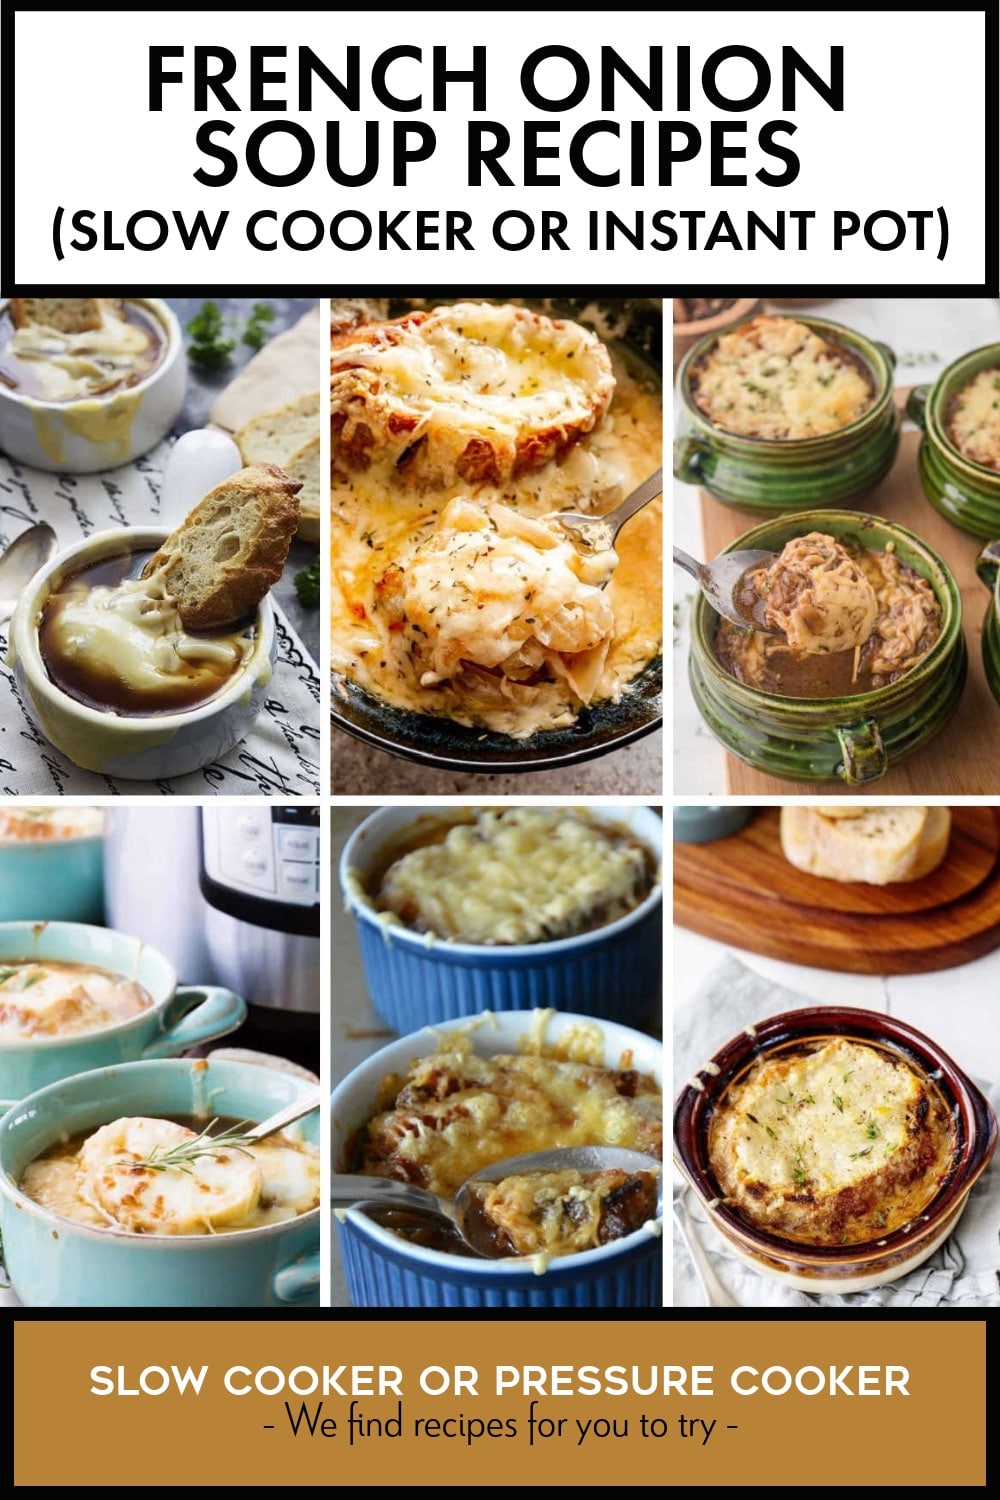 Pinterest image of French Onion Soup Recipes (Slow Cooker or Instant Pot)